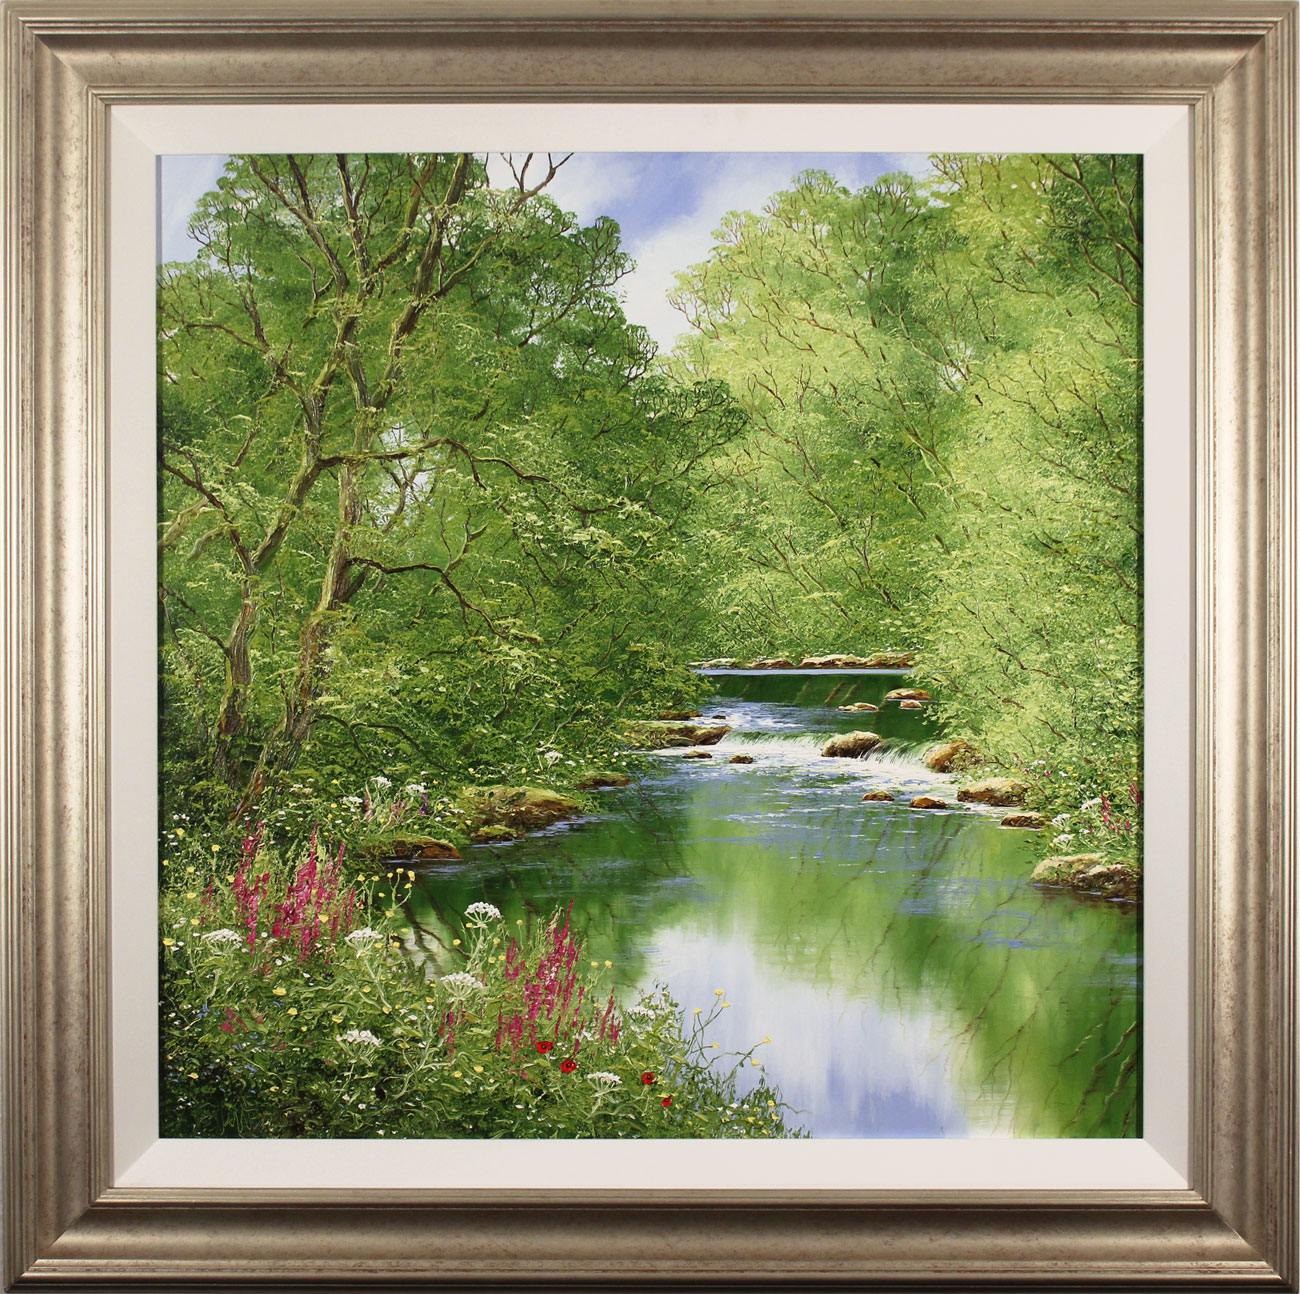 Terry Evans, Original oil painting on canvas, Quiet of the Wood